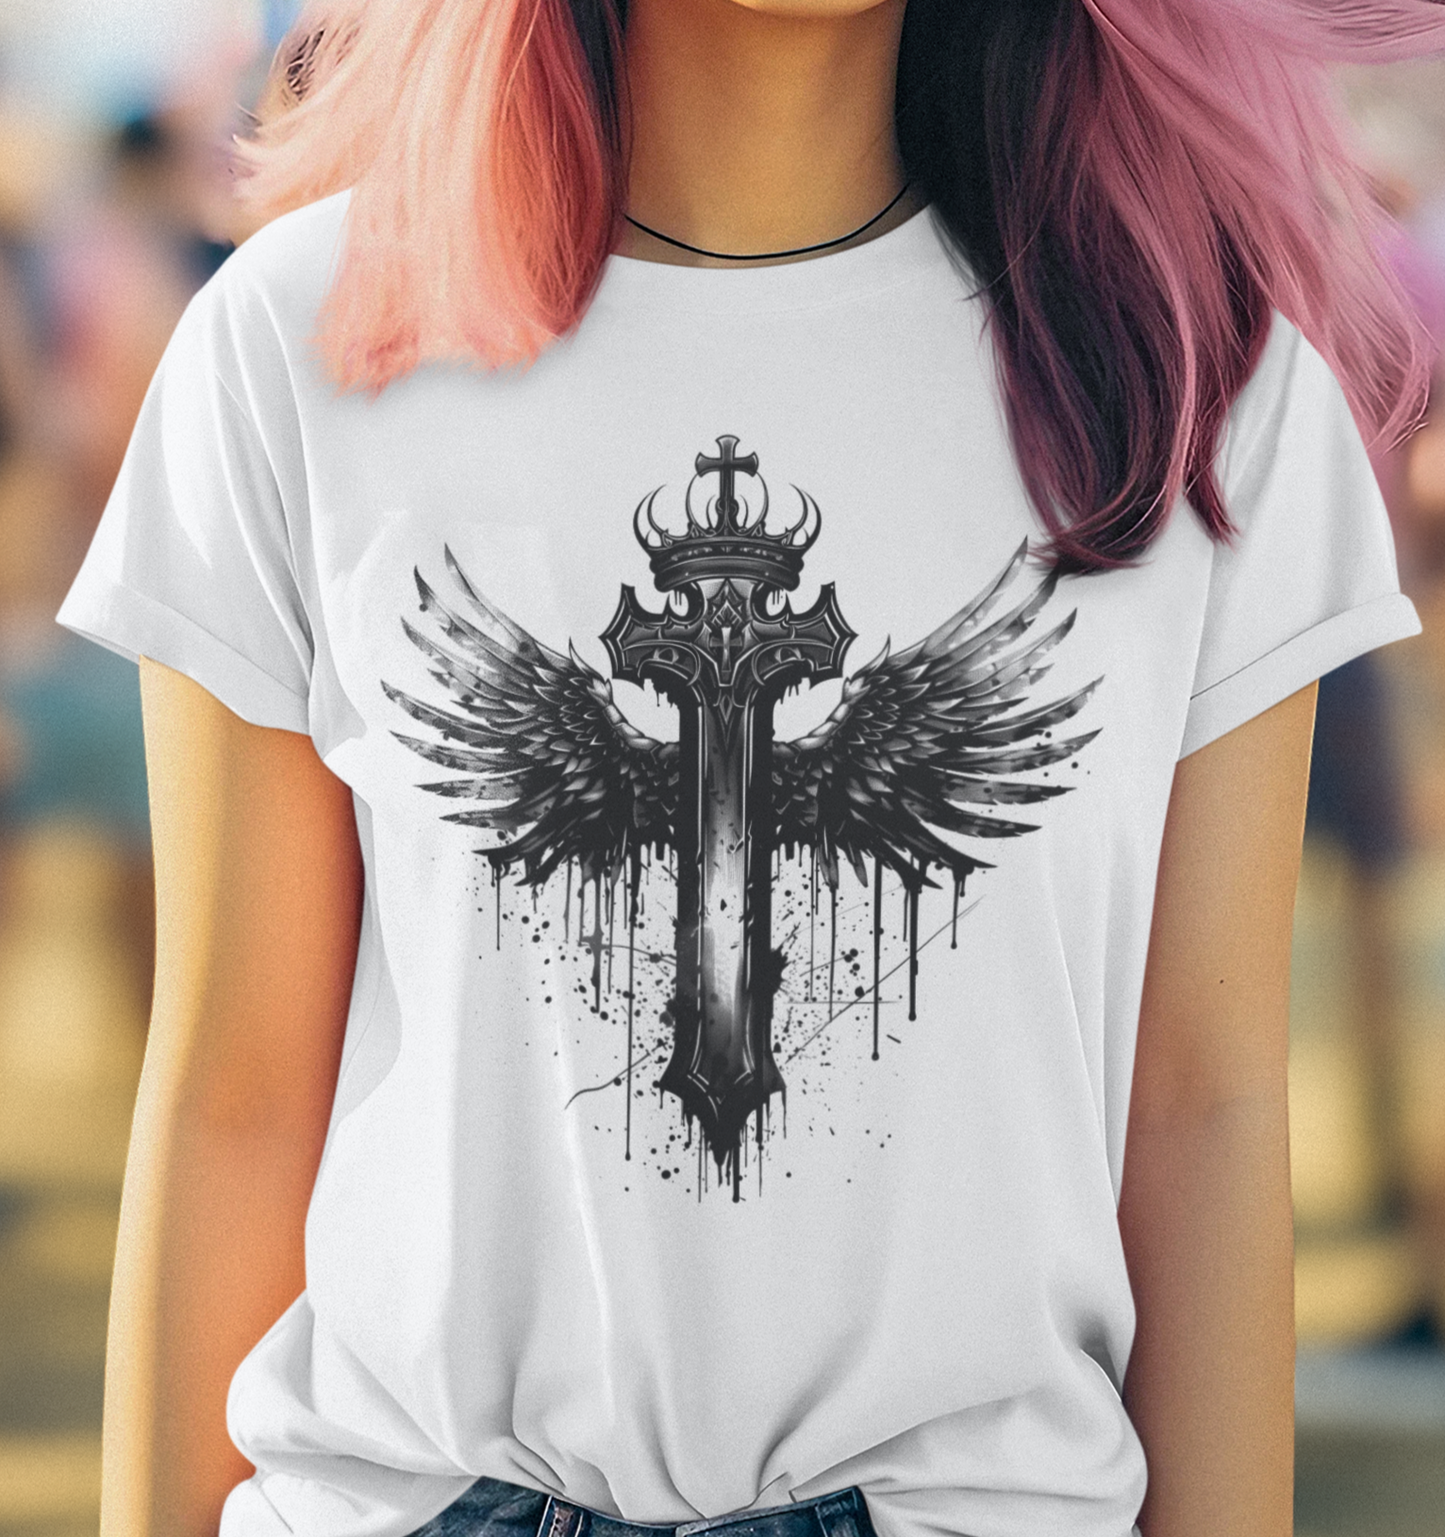 Cross and Wings Shirt, Cross T-Shirt, Wings T Shirt, Cross Angels Shirt, Cross Wings Graphic Tee, Jesus Lover Shirt, Gift for Her